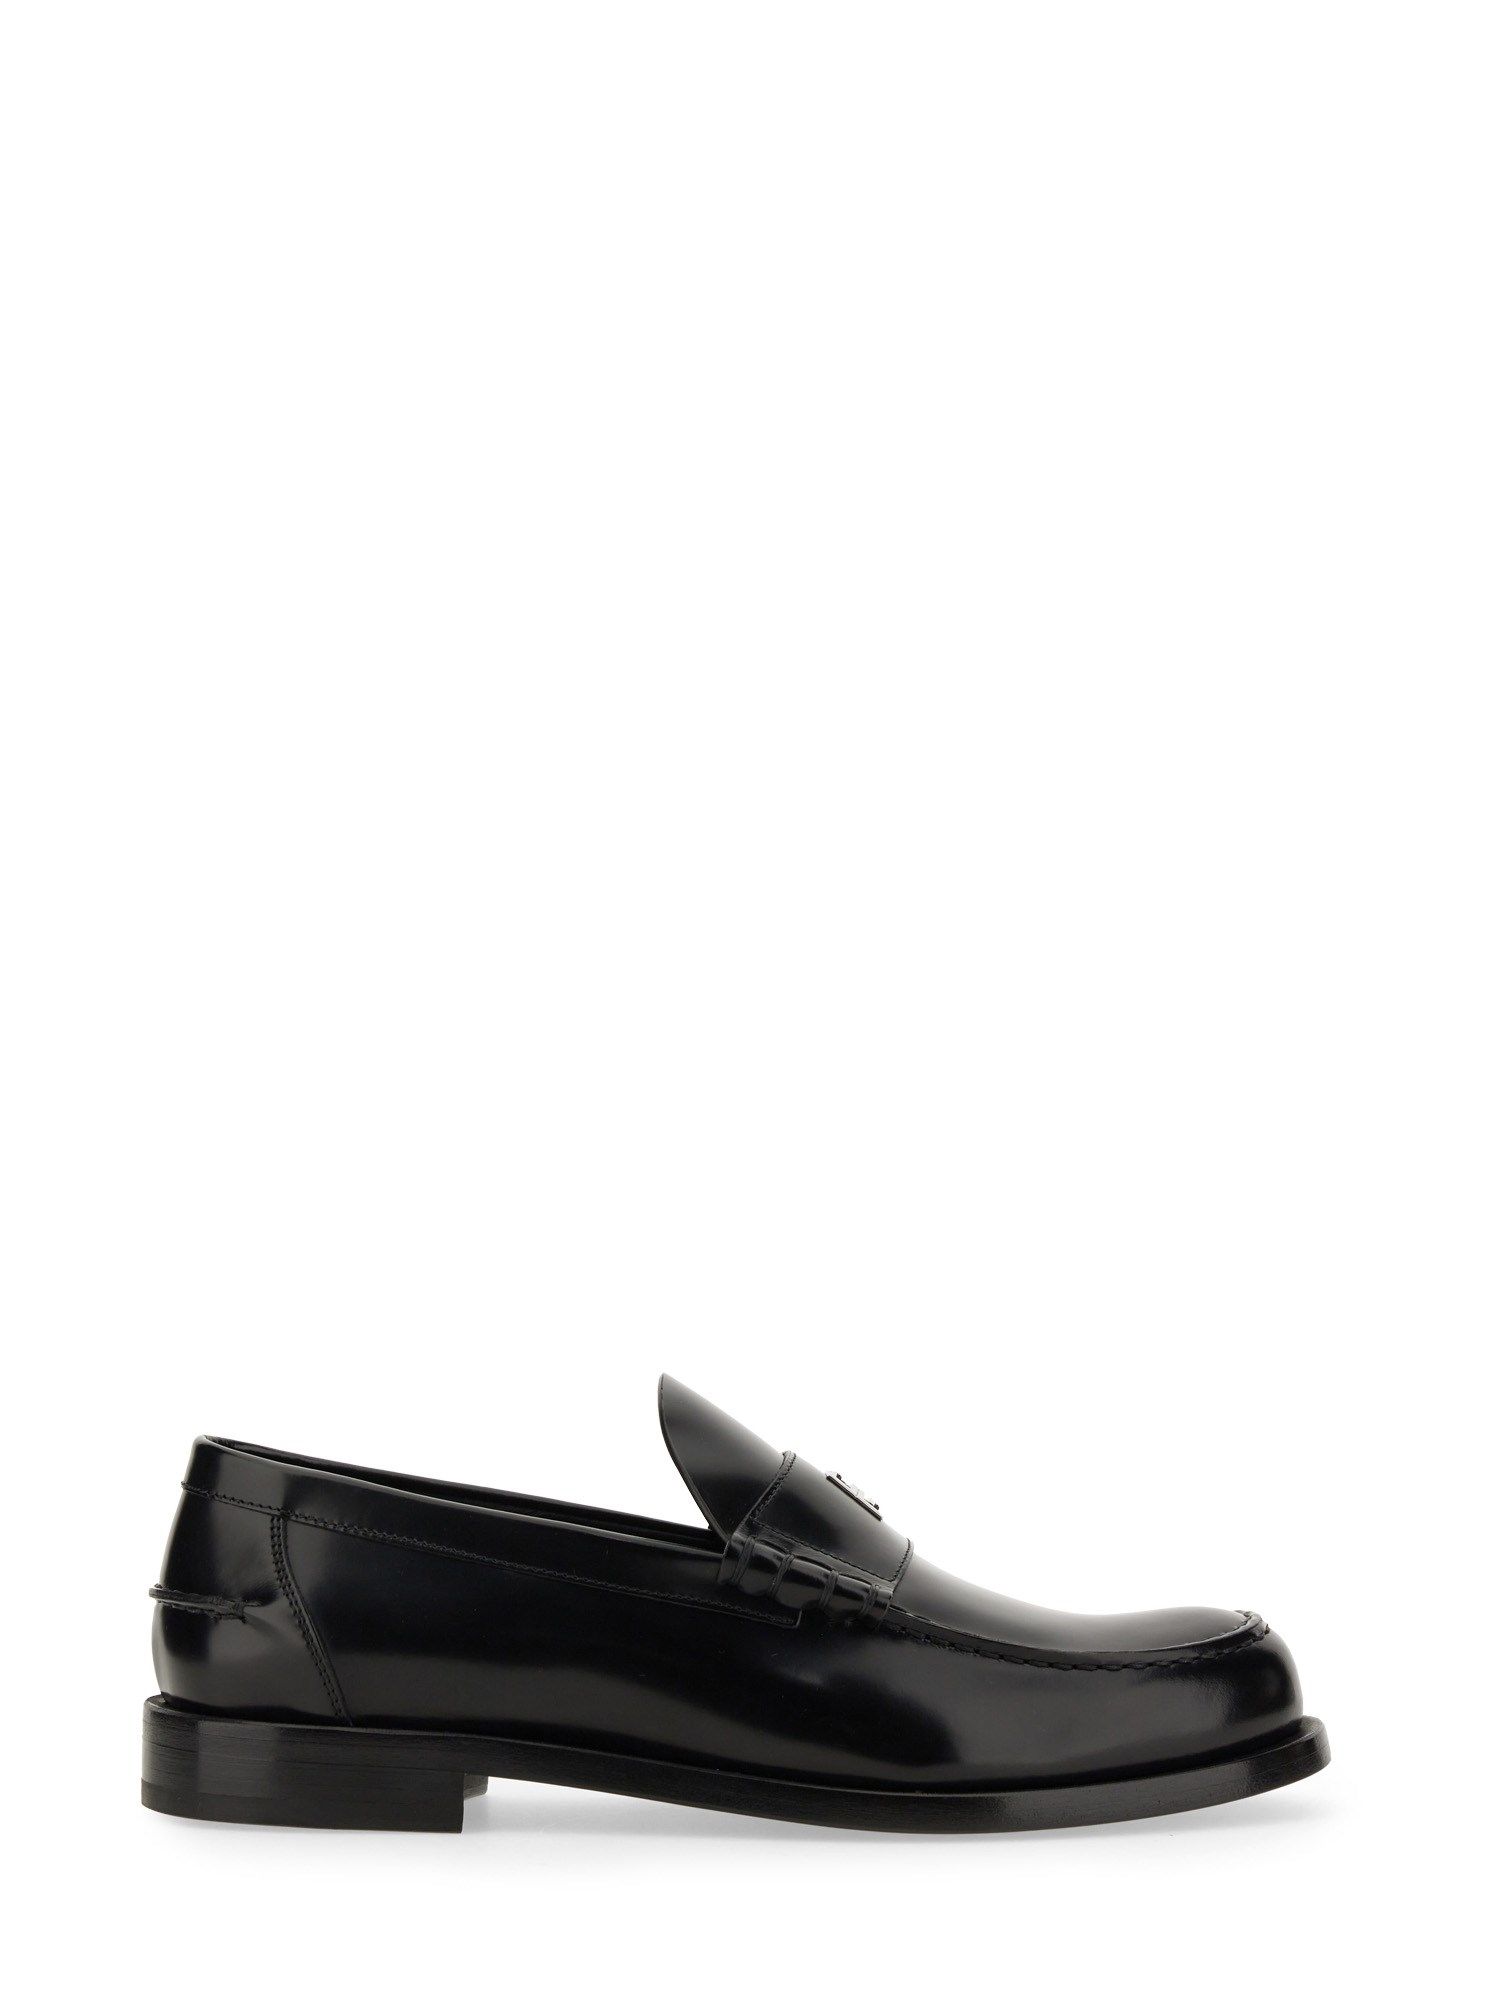 givenchy loafer with logo